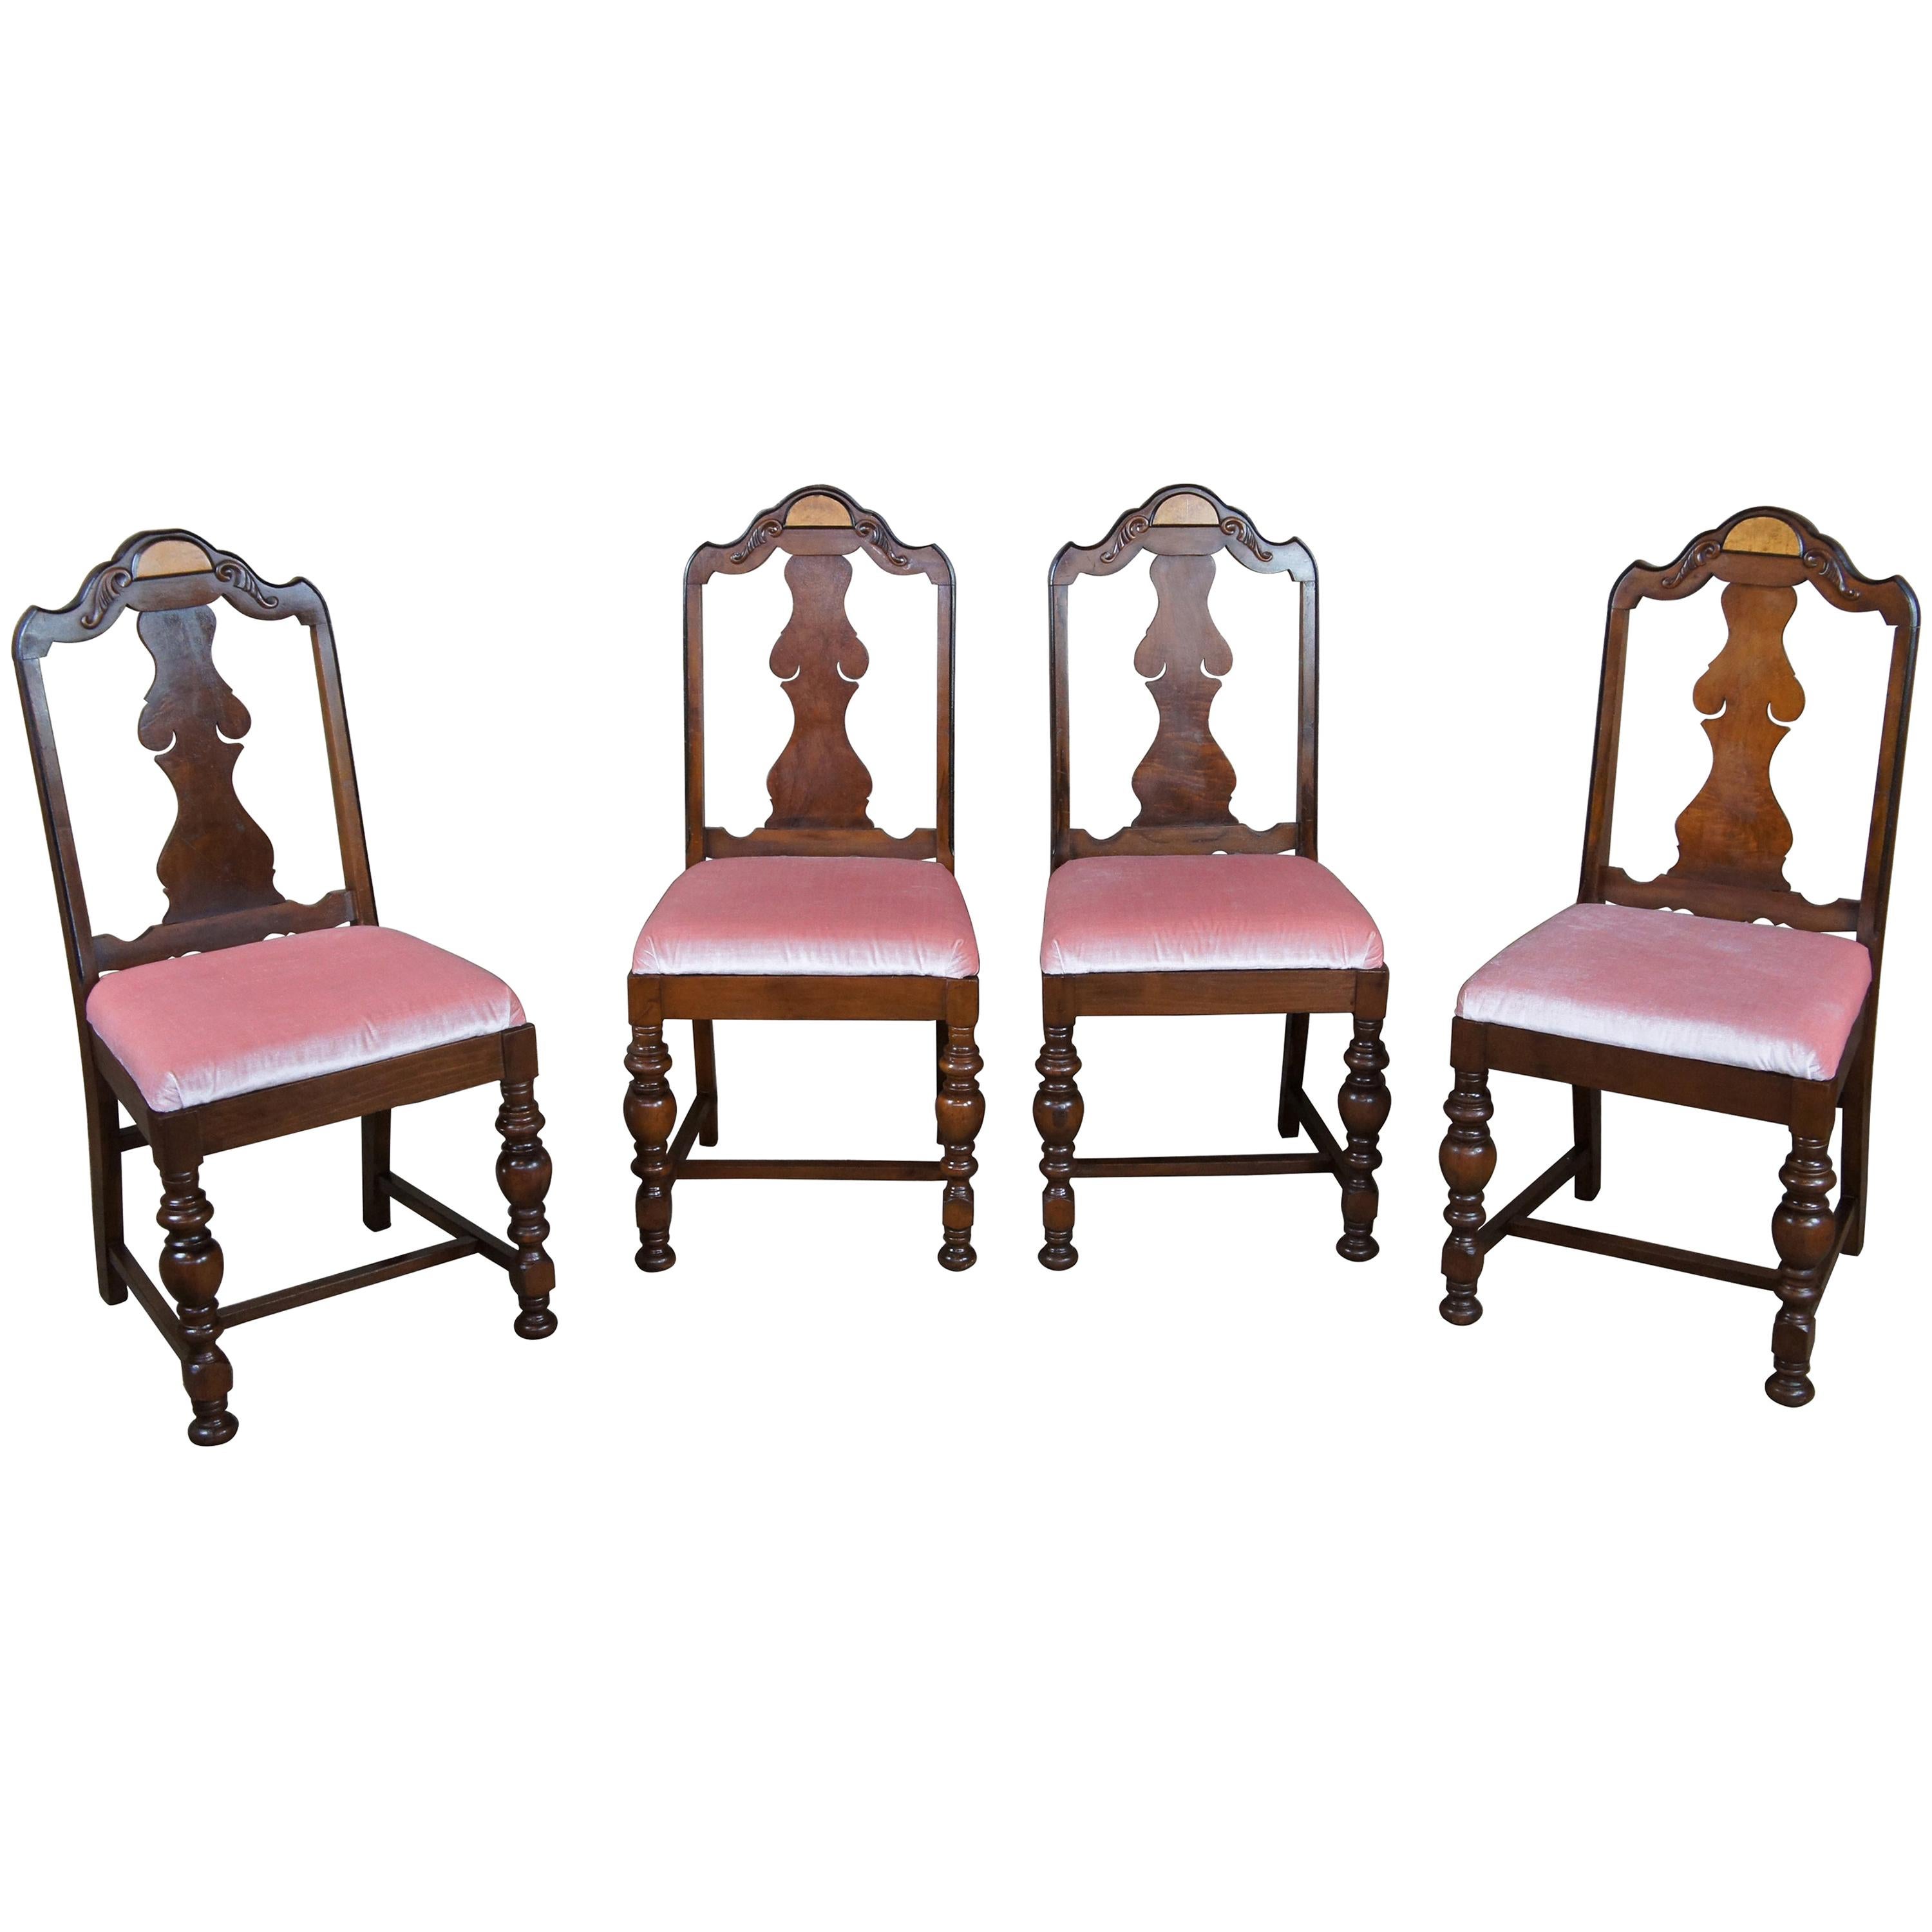 4 Early 20th Century Antique Jacobean Revival Burled Walnut Dining Side Chairs